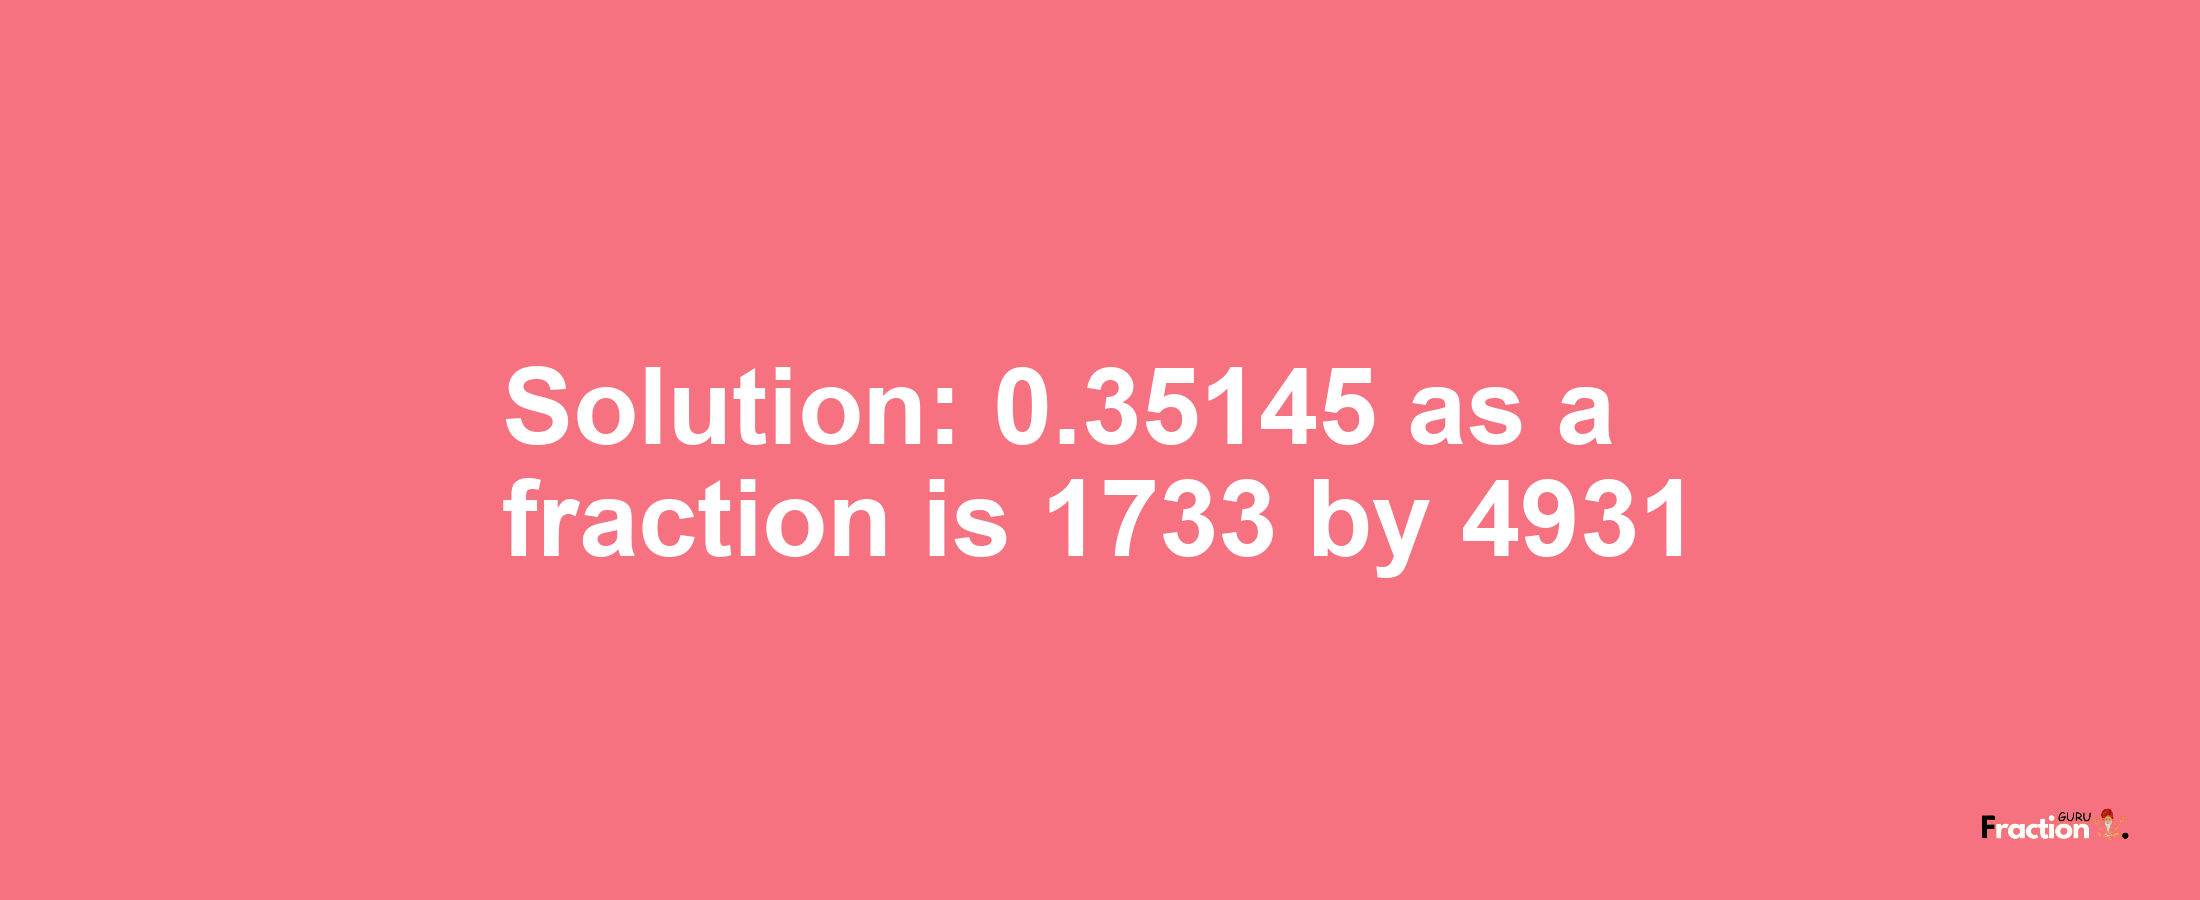 Solution:0.35145 as a fraction is 1733/4931